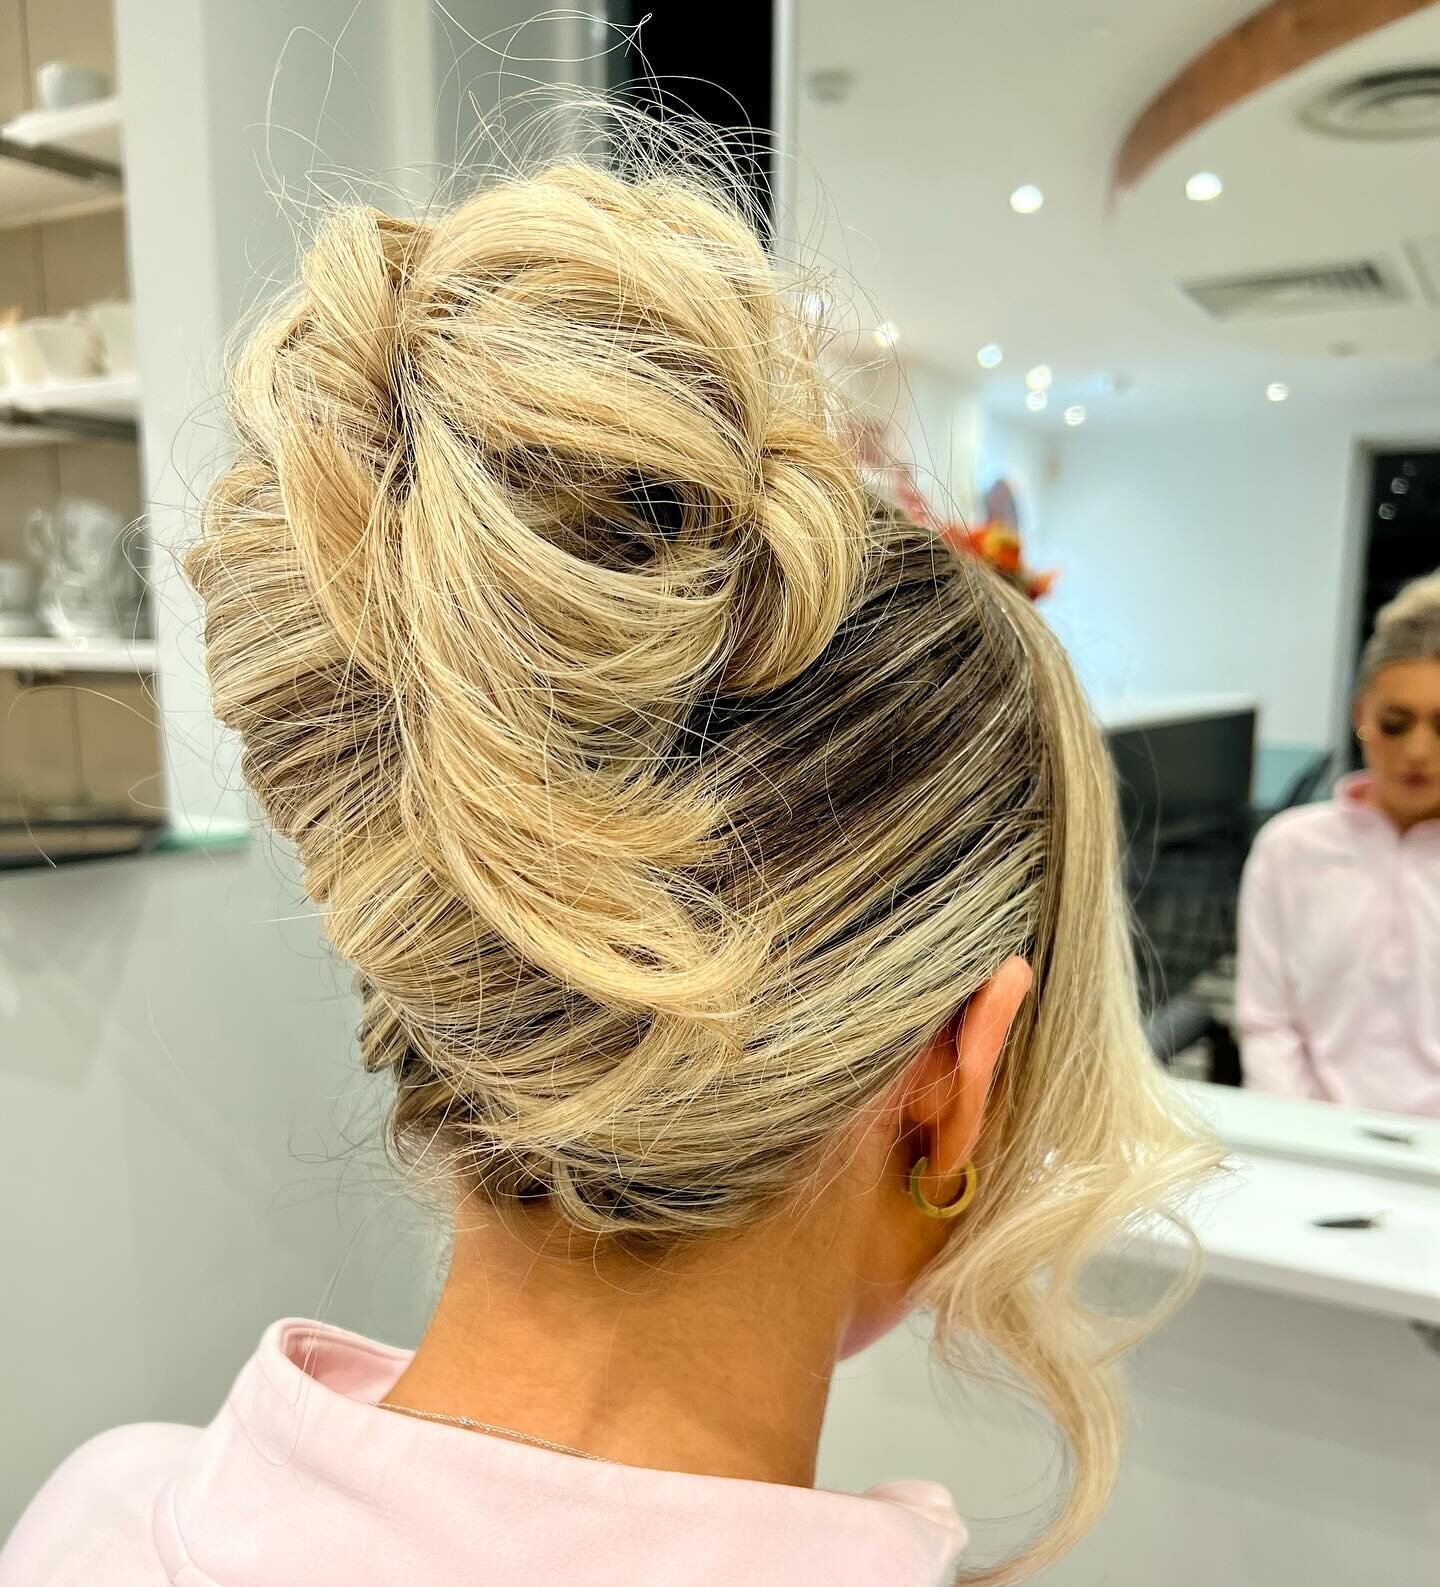 Holiday season is well underway at The Blowout Bar. What do you think of this hair-up, created by Anderson. 💫 

Have you booked in your appointments this holiday season? 🎄🌲⭐️